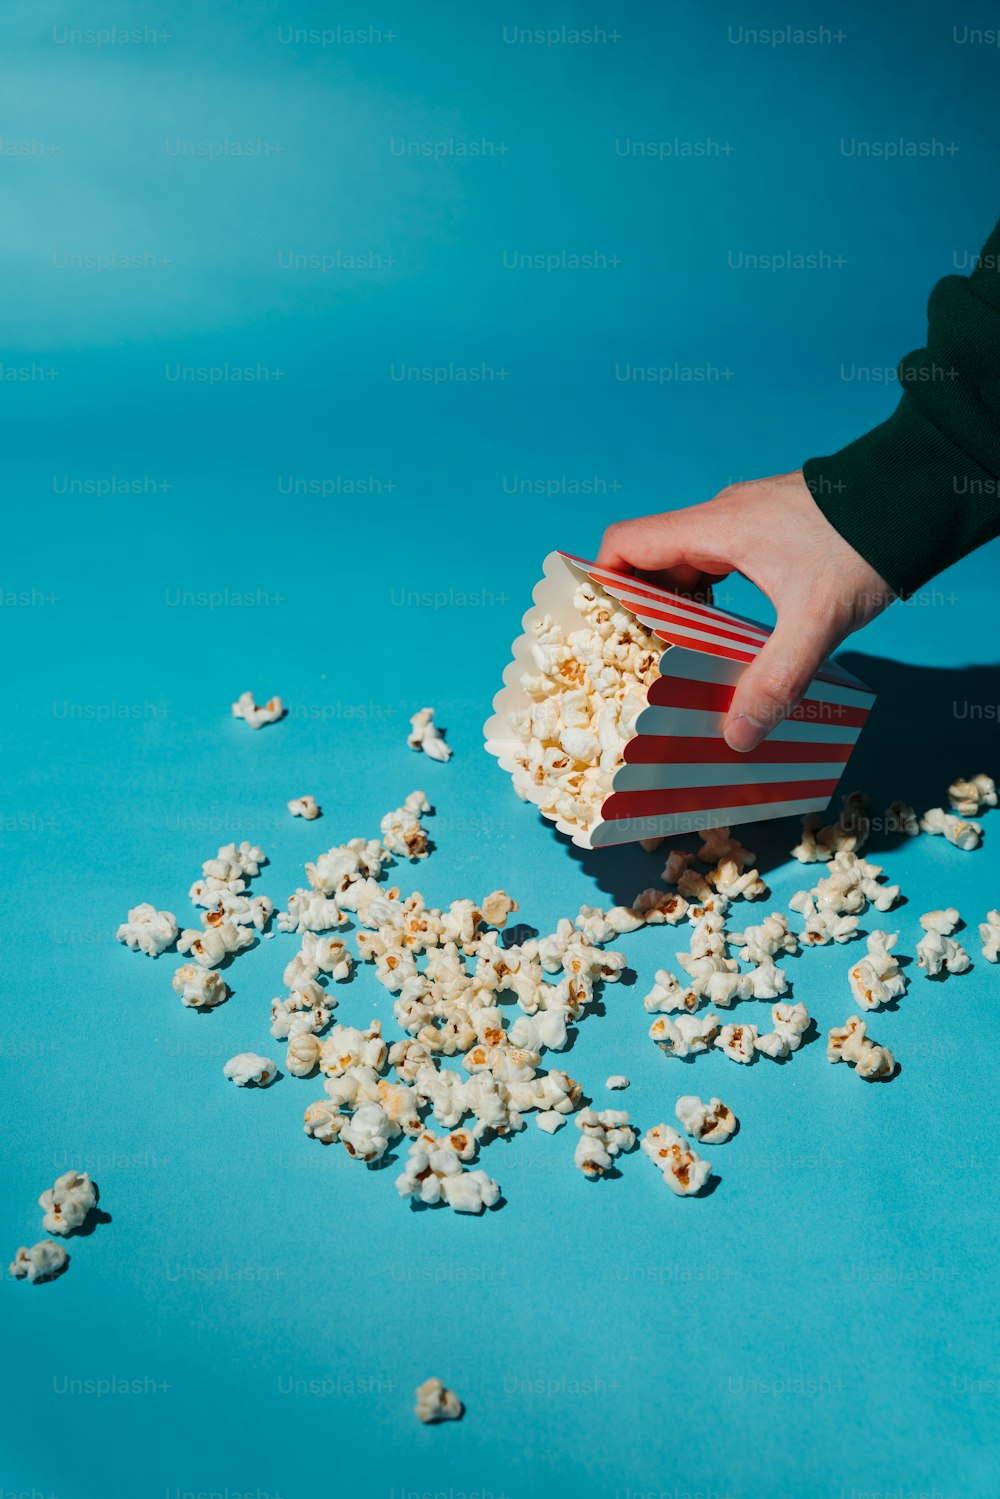 a person holding a popcorn box over a pile of popcorn